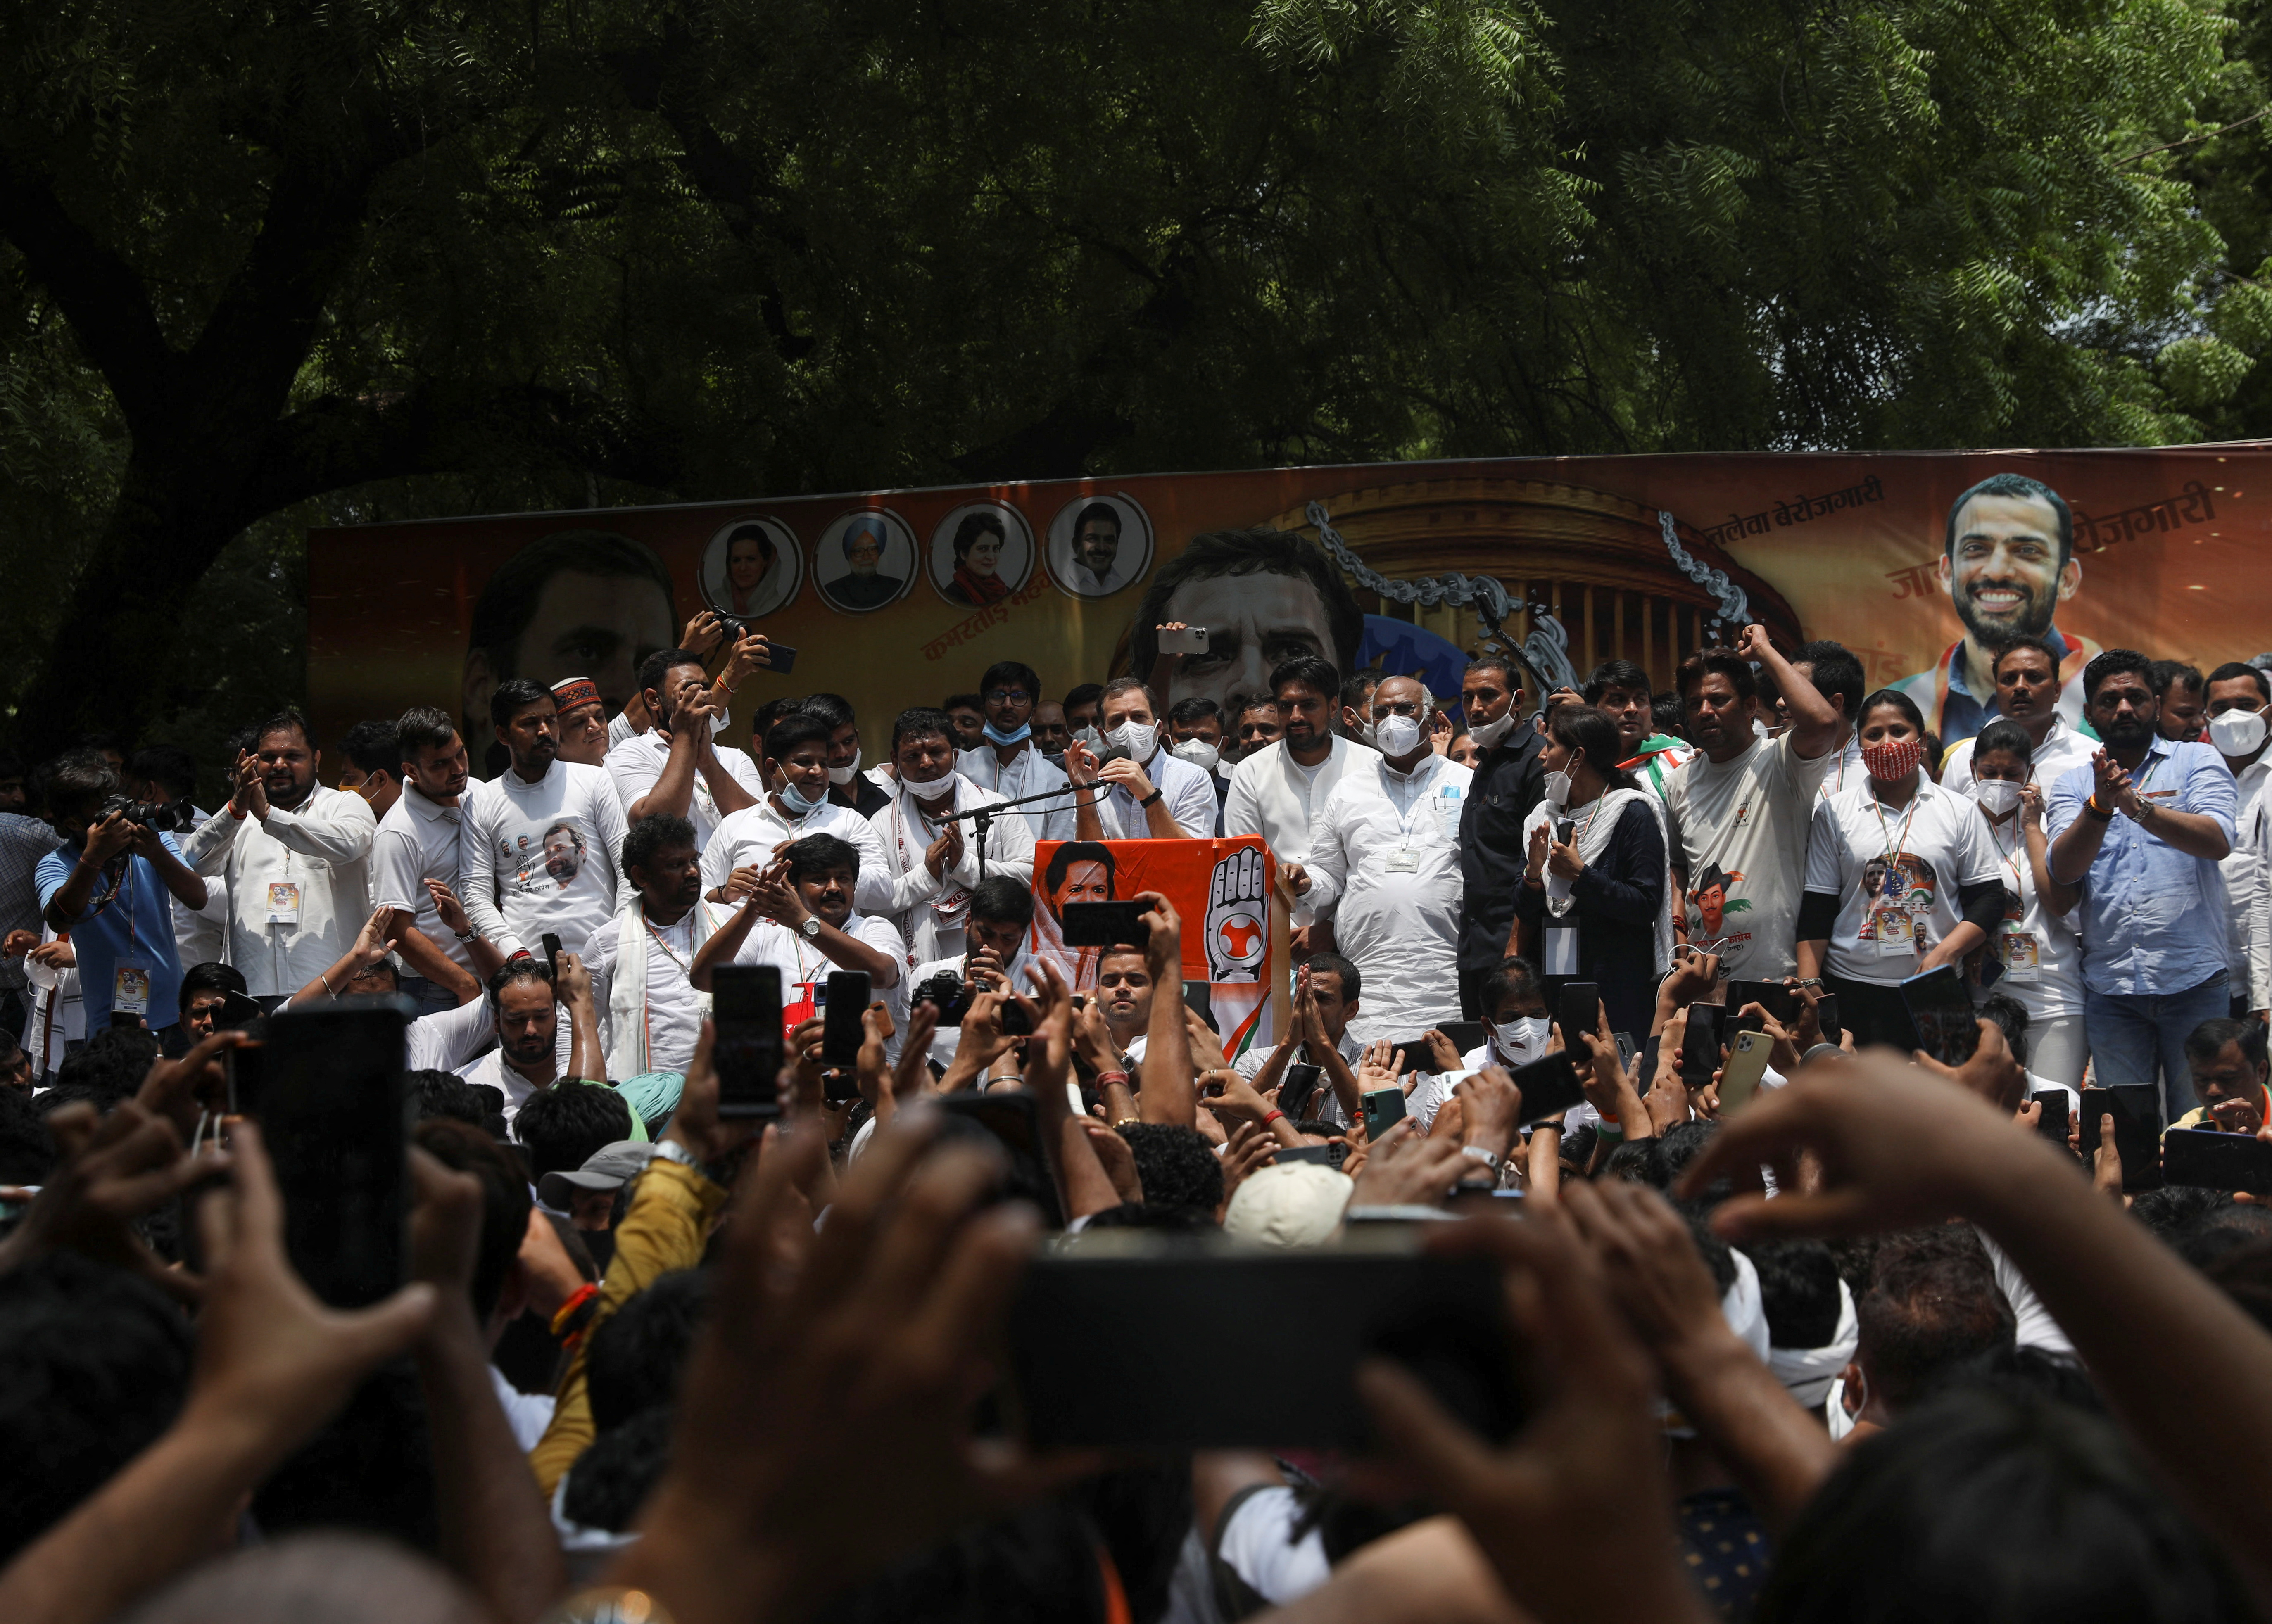 India's main opposition Congress party leader Rahul Gandhi attends a protest against what they say inflation, farm laws, unemployment and Pegasus snooping, in New Delhi, India, August 5, 2021. REUTERS/Anushree Fadnavis